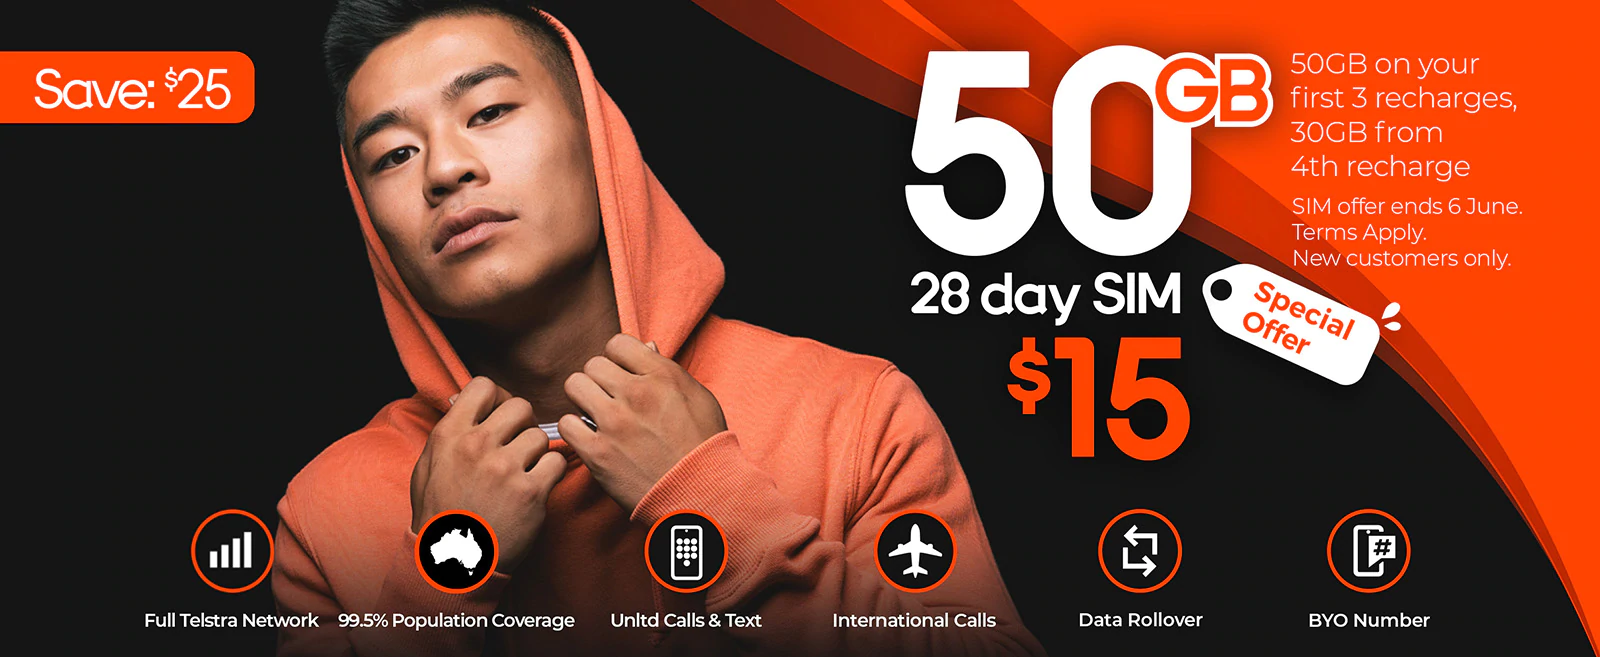 $25 OFF on 50GB $40 Prepaid SIM - Now $15 at Boost Mobile